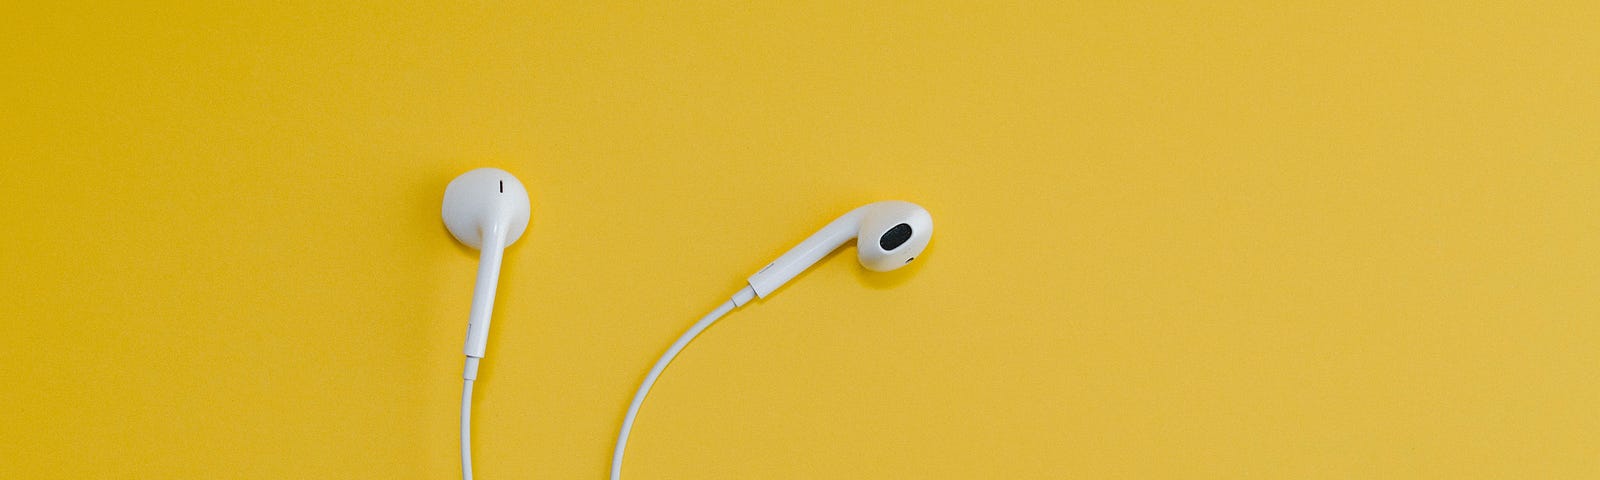 Wired earbud headphones on a yellow background